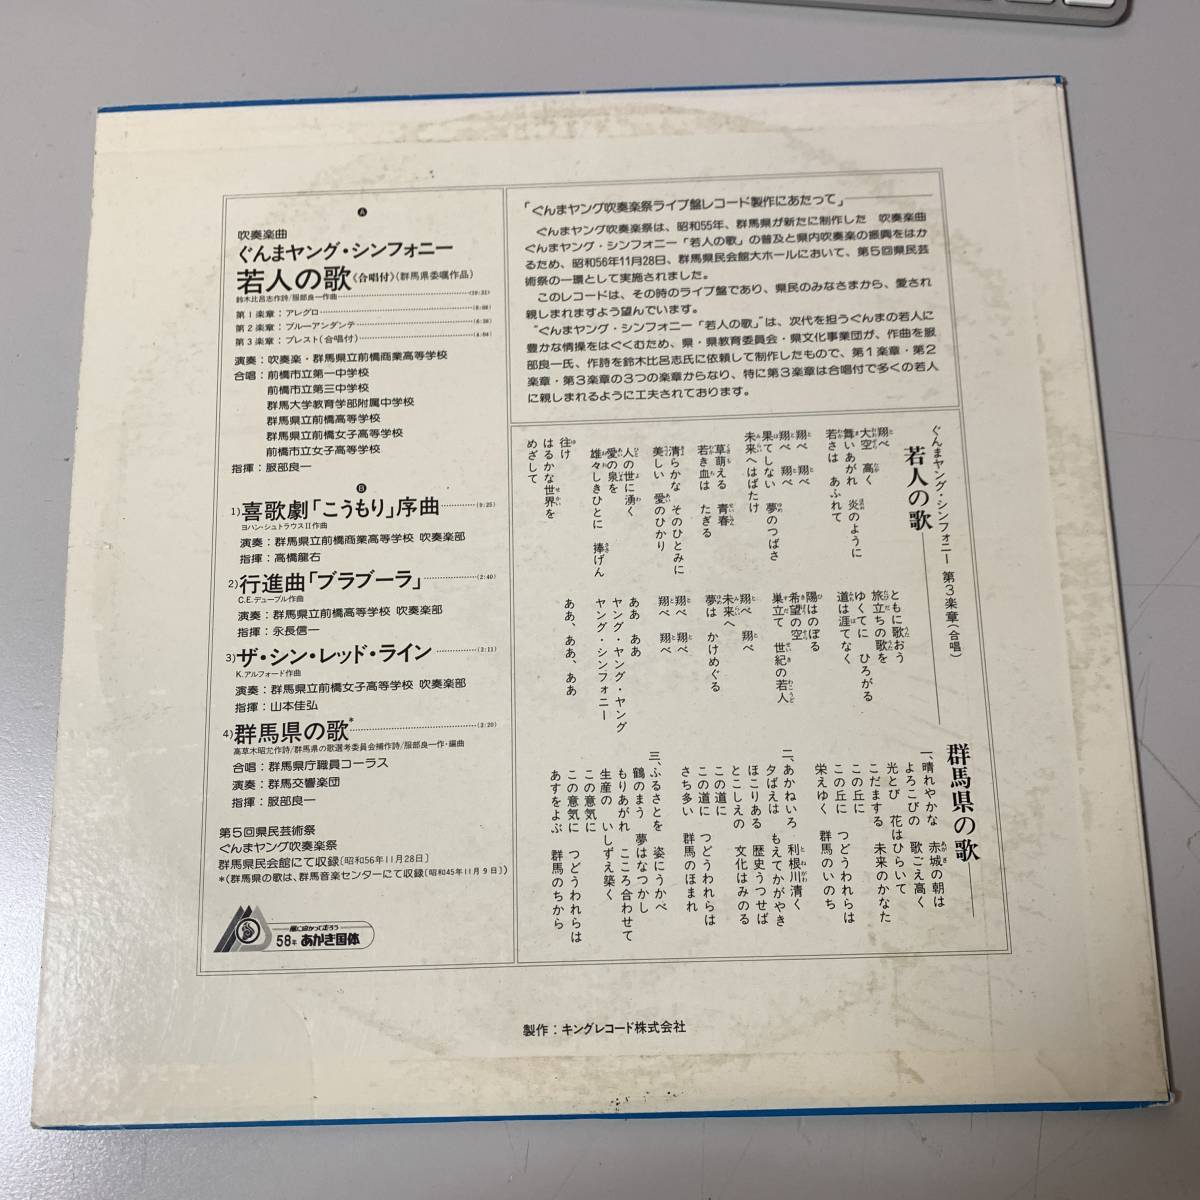  rare title King consigning beautiful record ... Young * symphony . person. . lyrics : Suzuki ratio .. composition : Hattori good one made : Gunma prefecture / prefecture culture project .